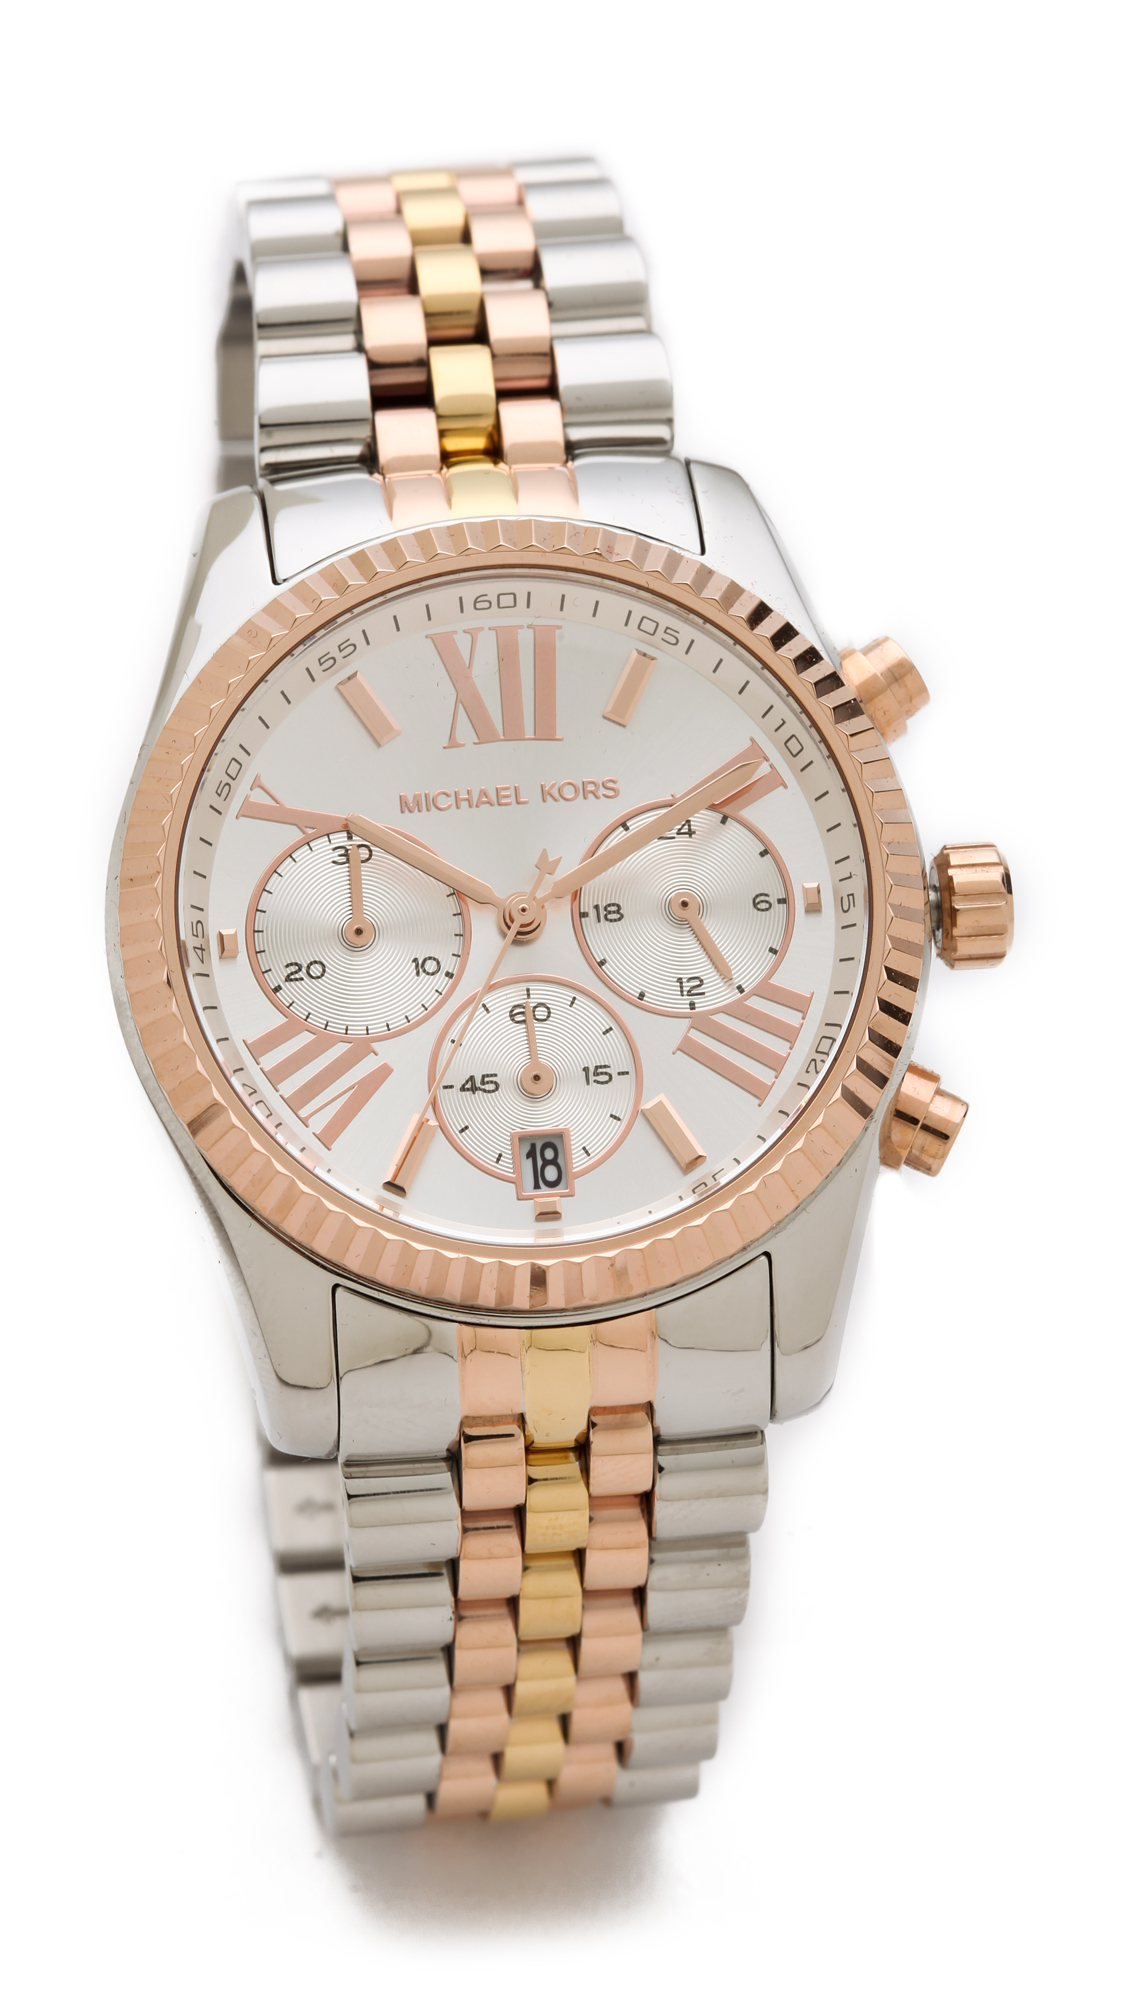 Michael kors Lexington Triology Watch - Rose Gold/silver/yellow Gold in